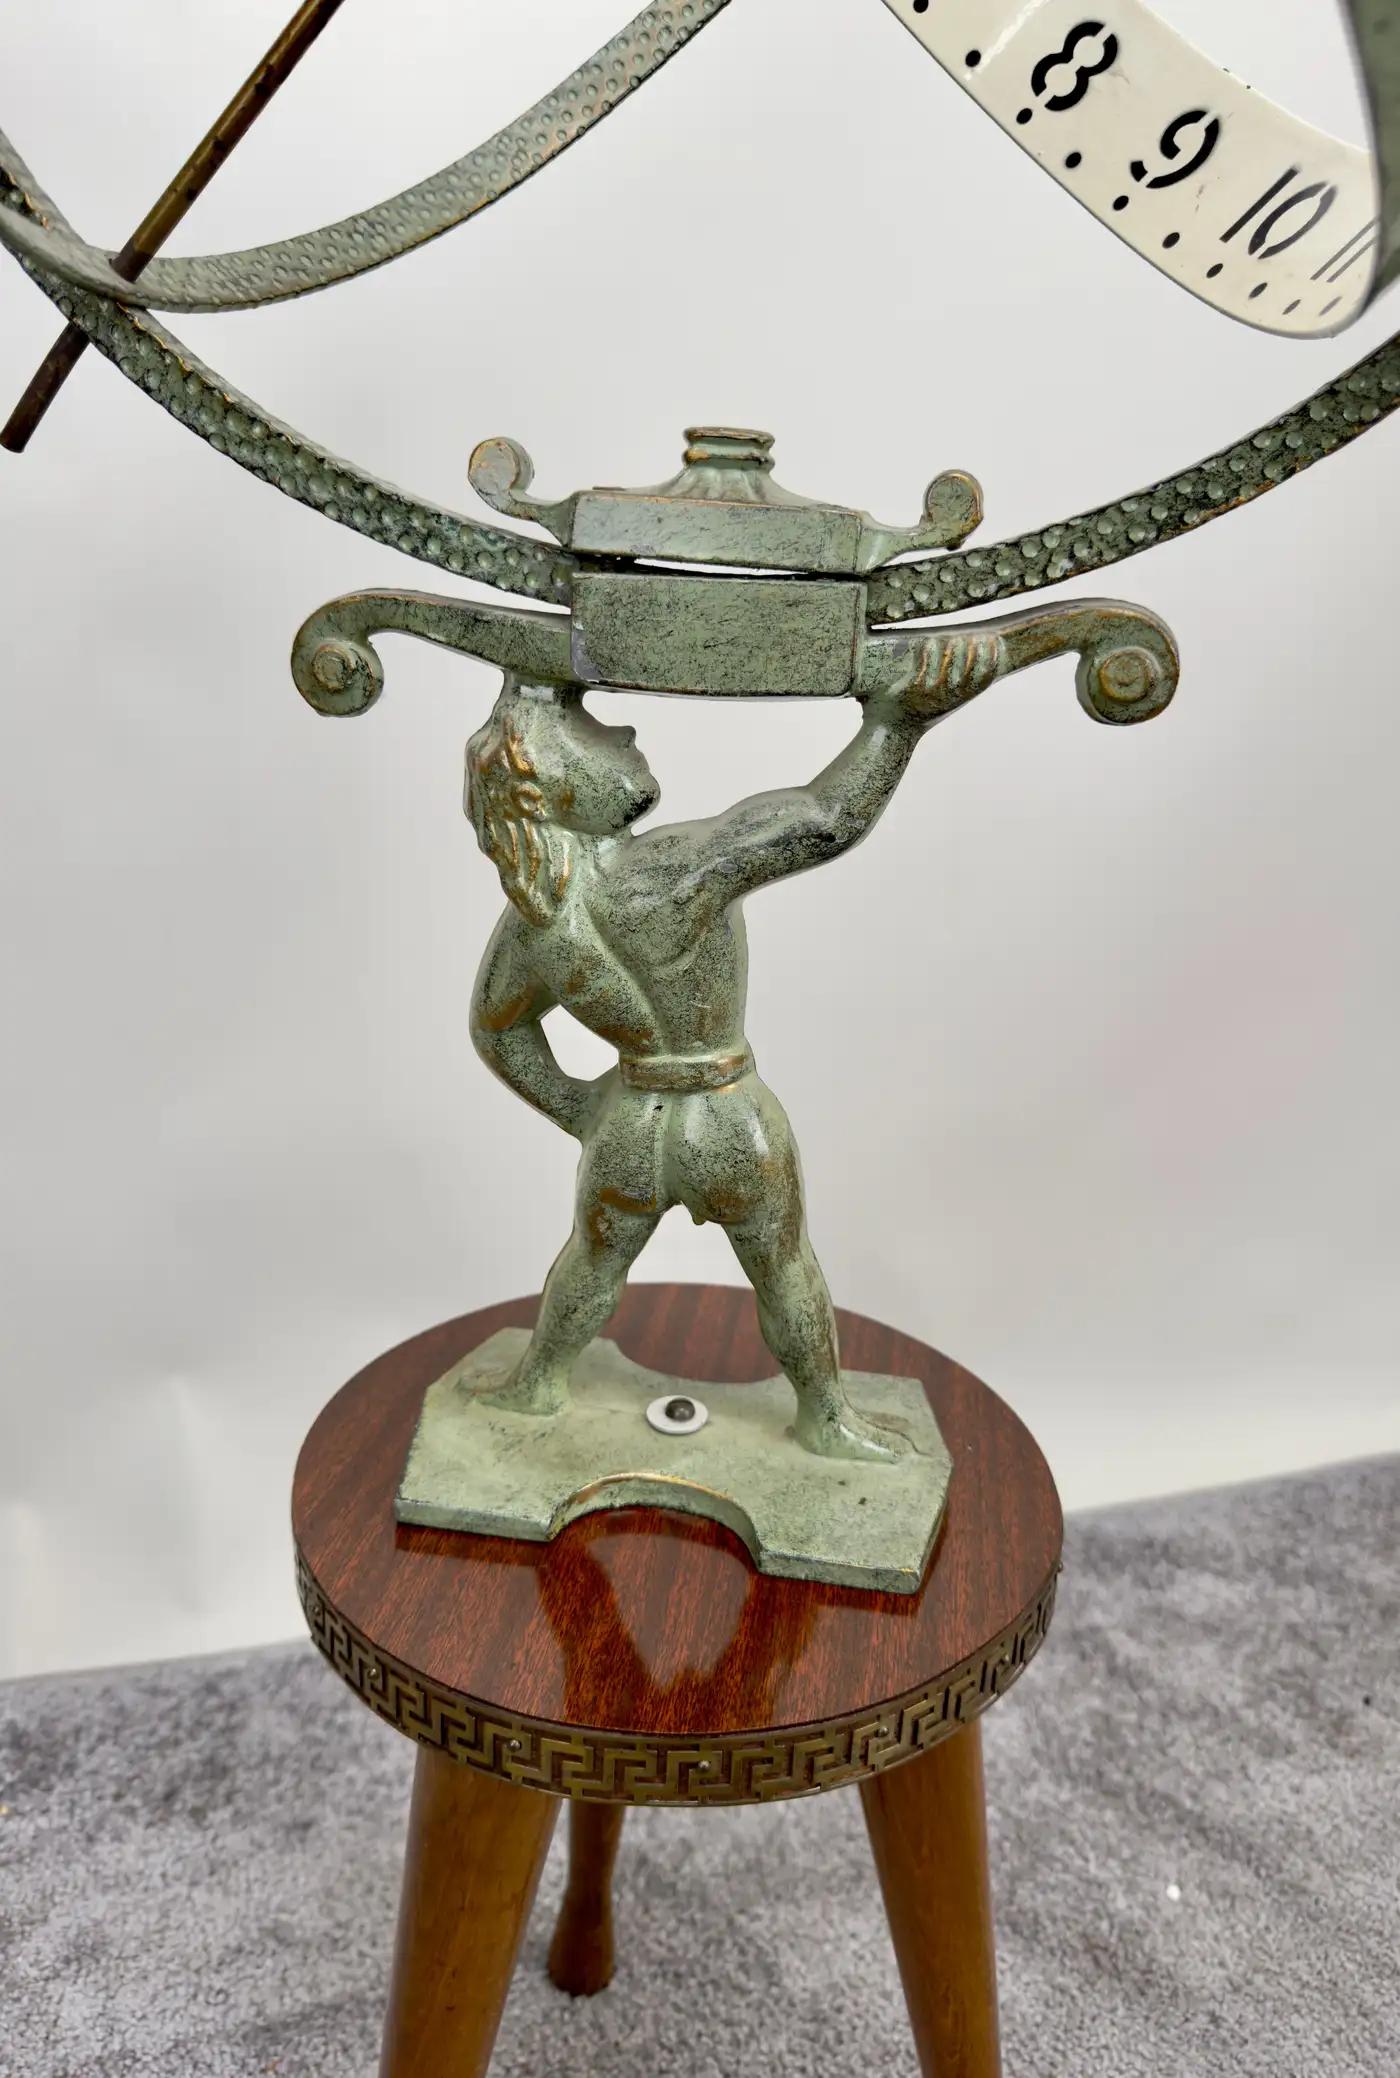 Vintage Swedish Sun Clock or Armillary Sun Dial Attributed to Sune Rooth For Sale 1